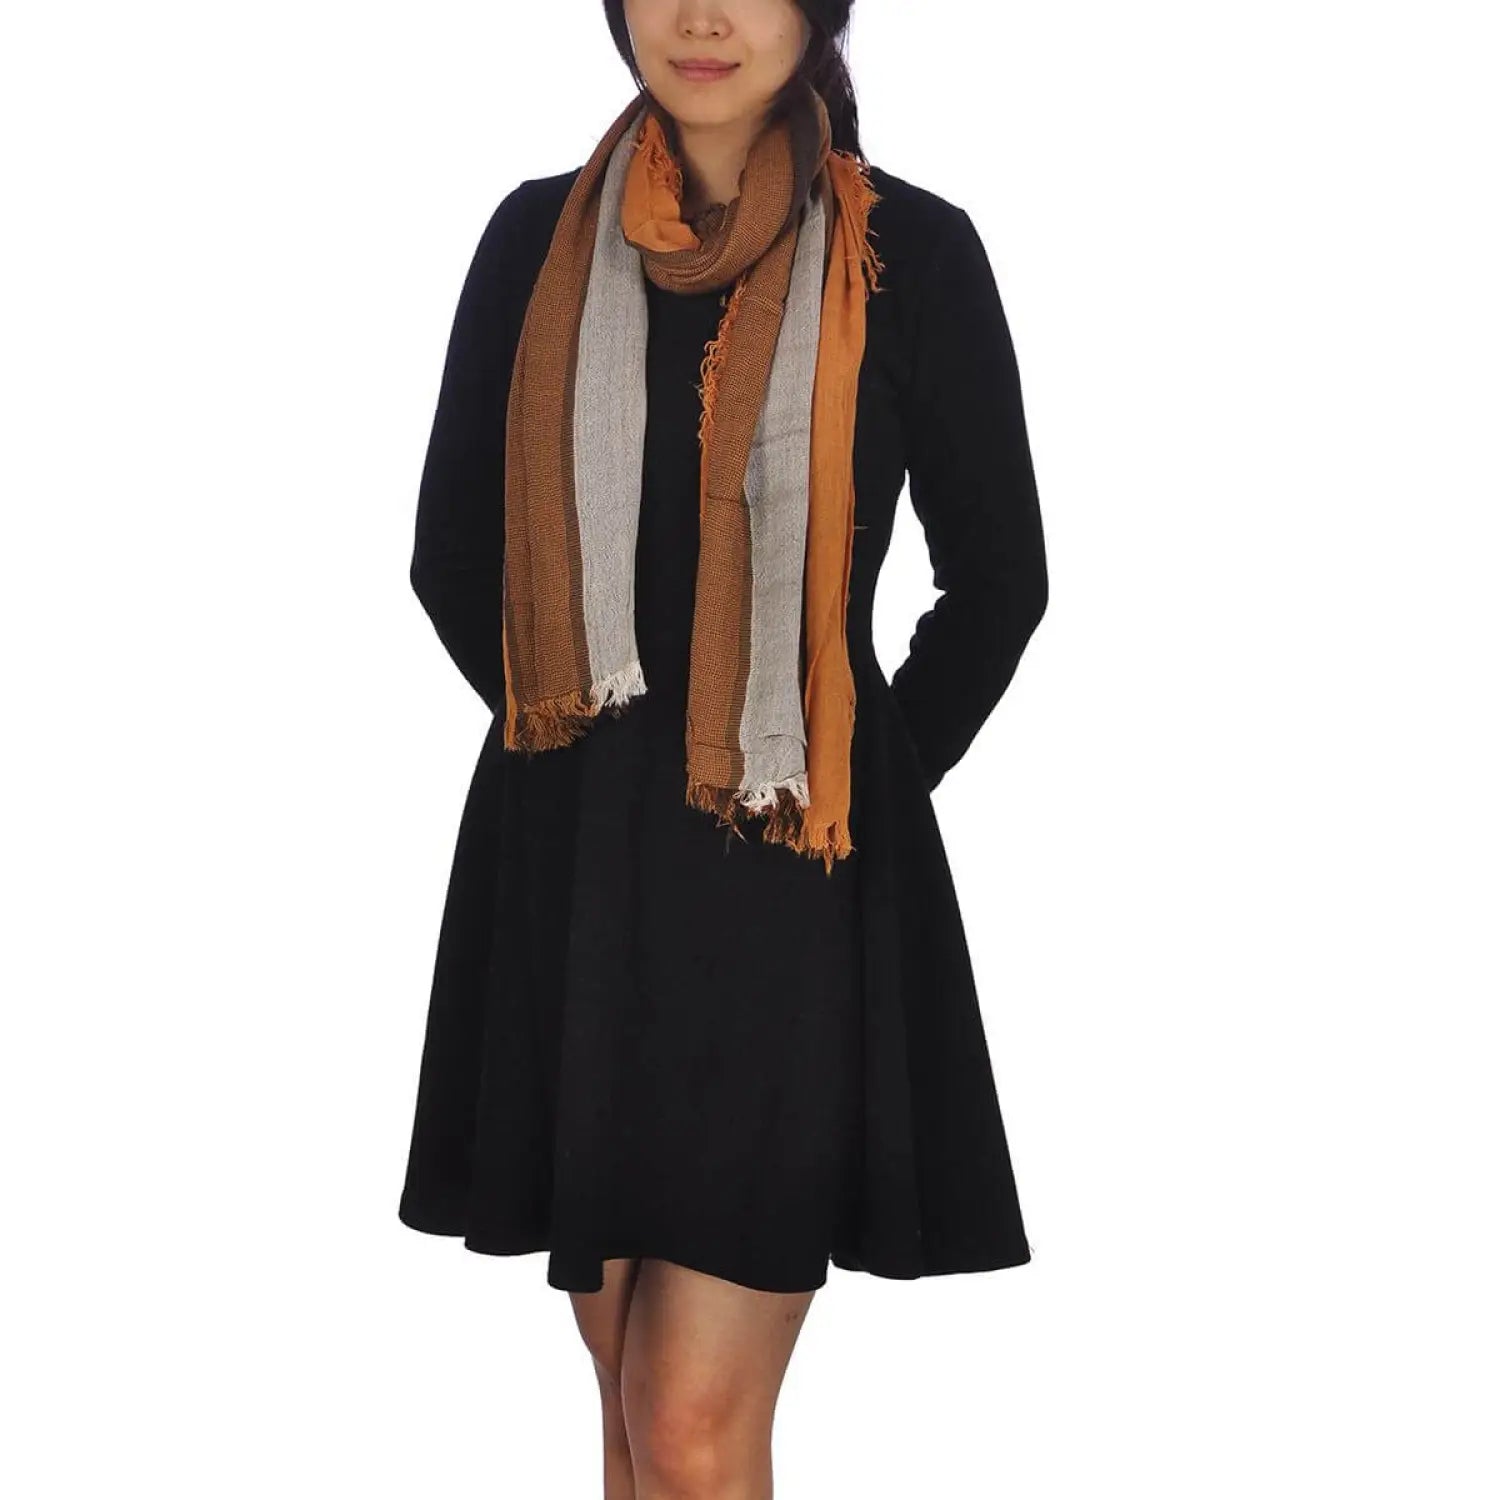 Woman wearing black coat and tan scarf for Bold Multicoloured Striped Scarf with Frayed Edges